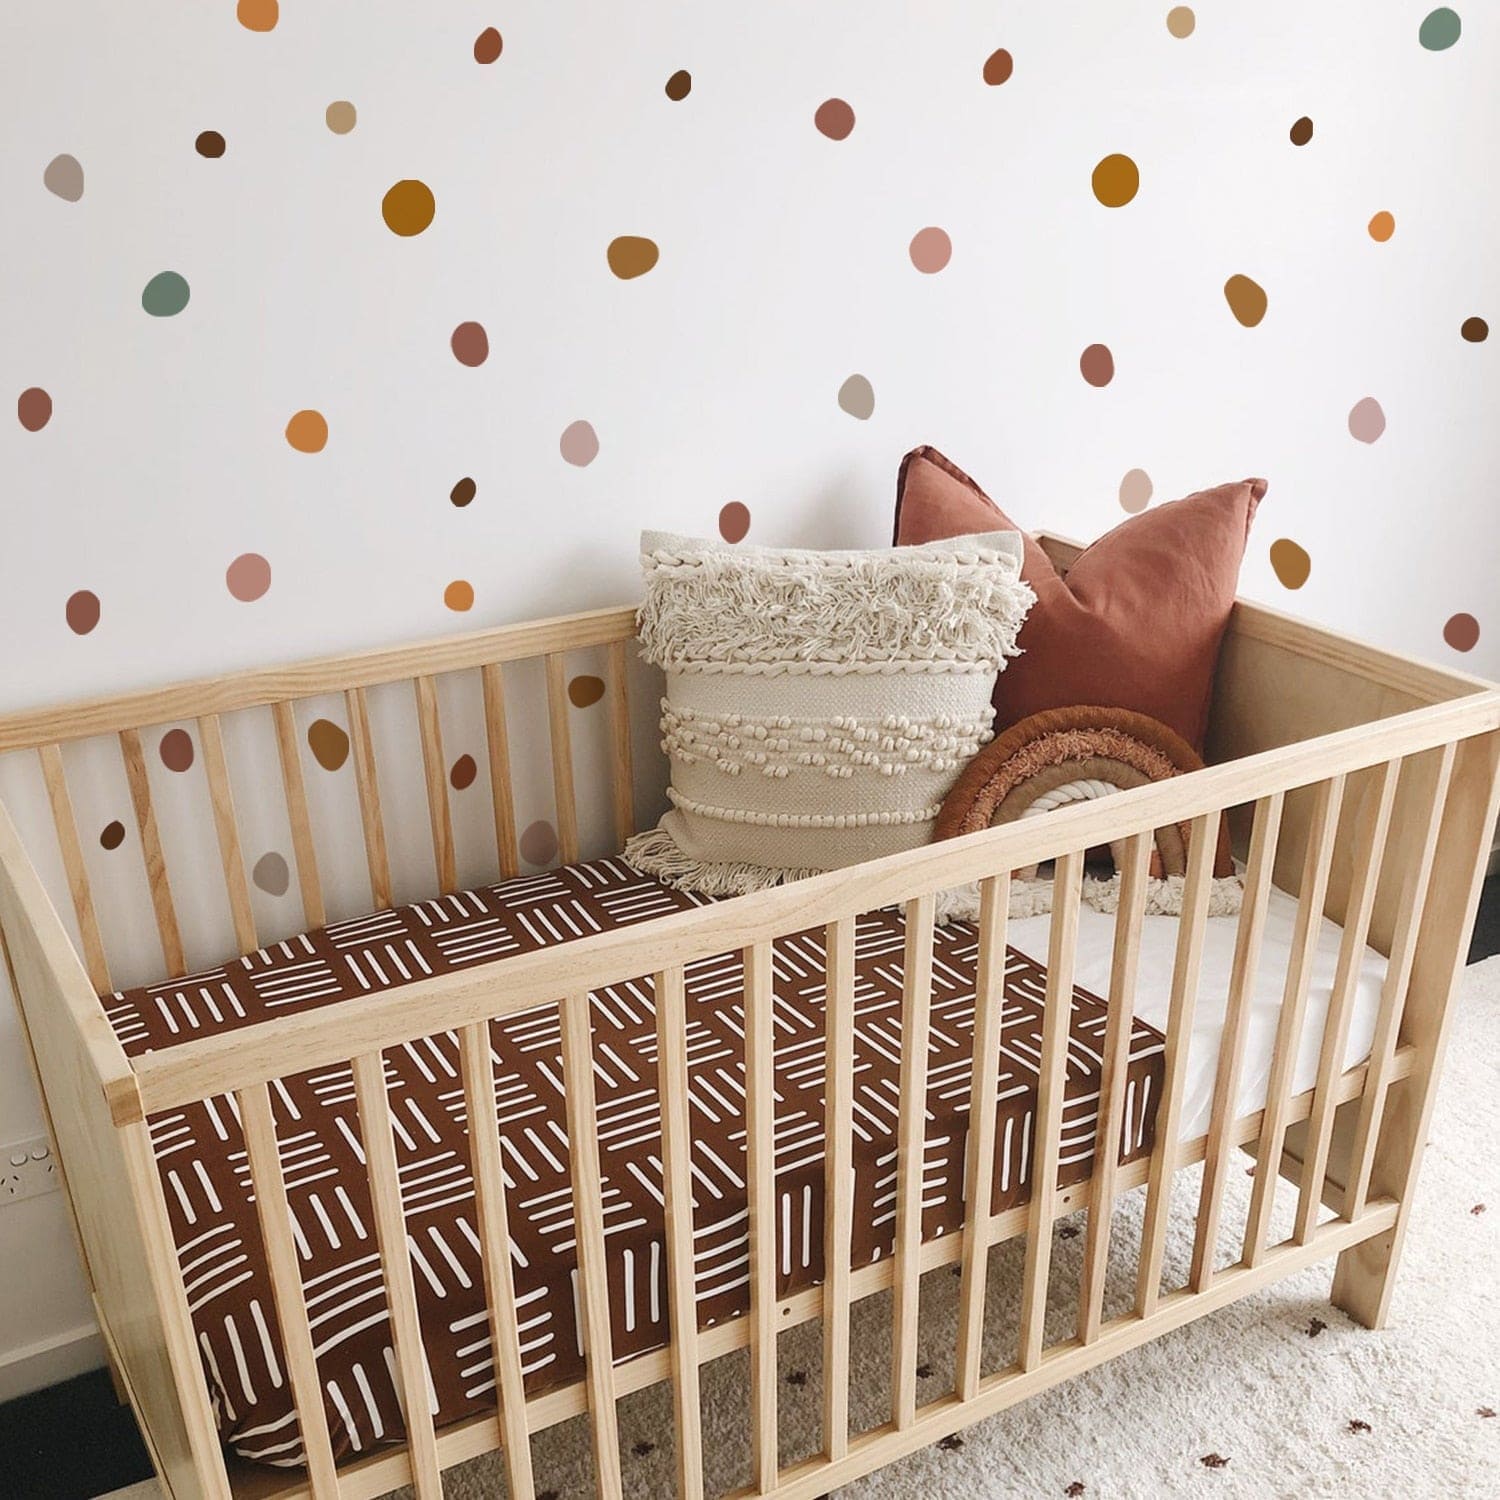 Transform Your Baby's Space with Adorable Baby Room Stickers - Easy and Fun Decor for Your Little One! - The Little Big Store